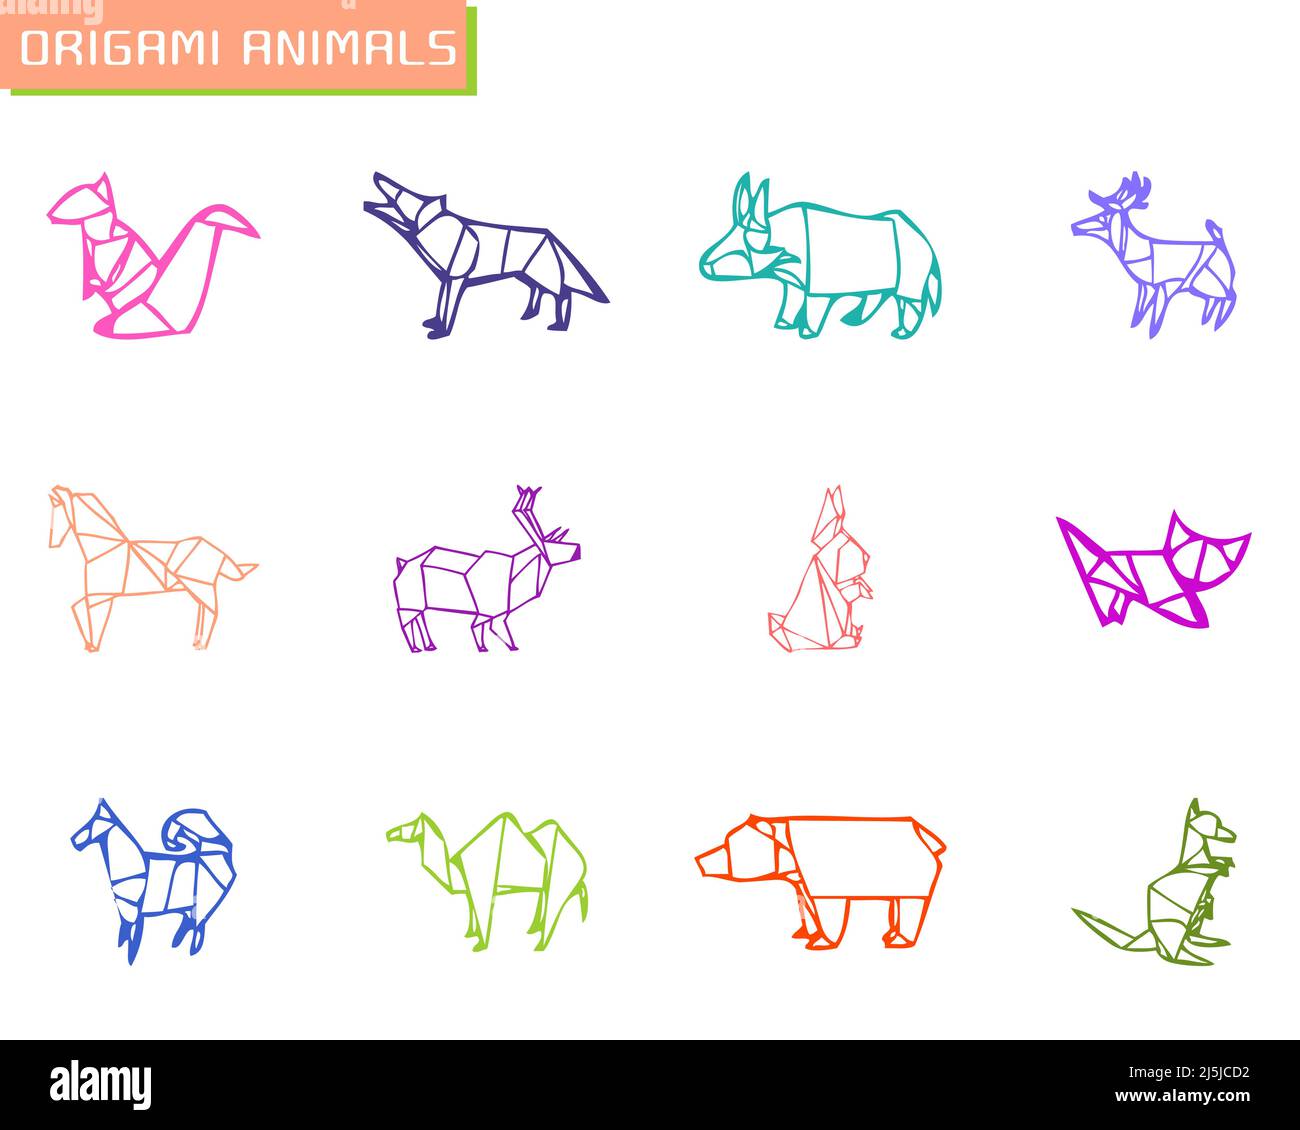 Origami Animals Colorful Flat Vector Icon set Stock Vector